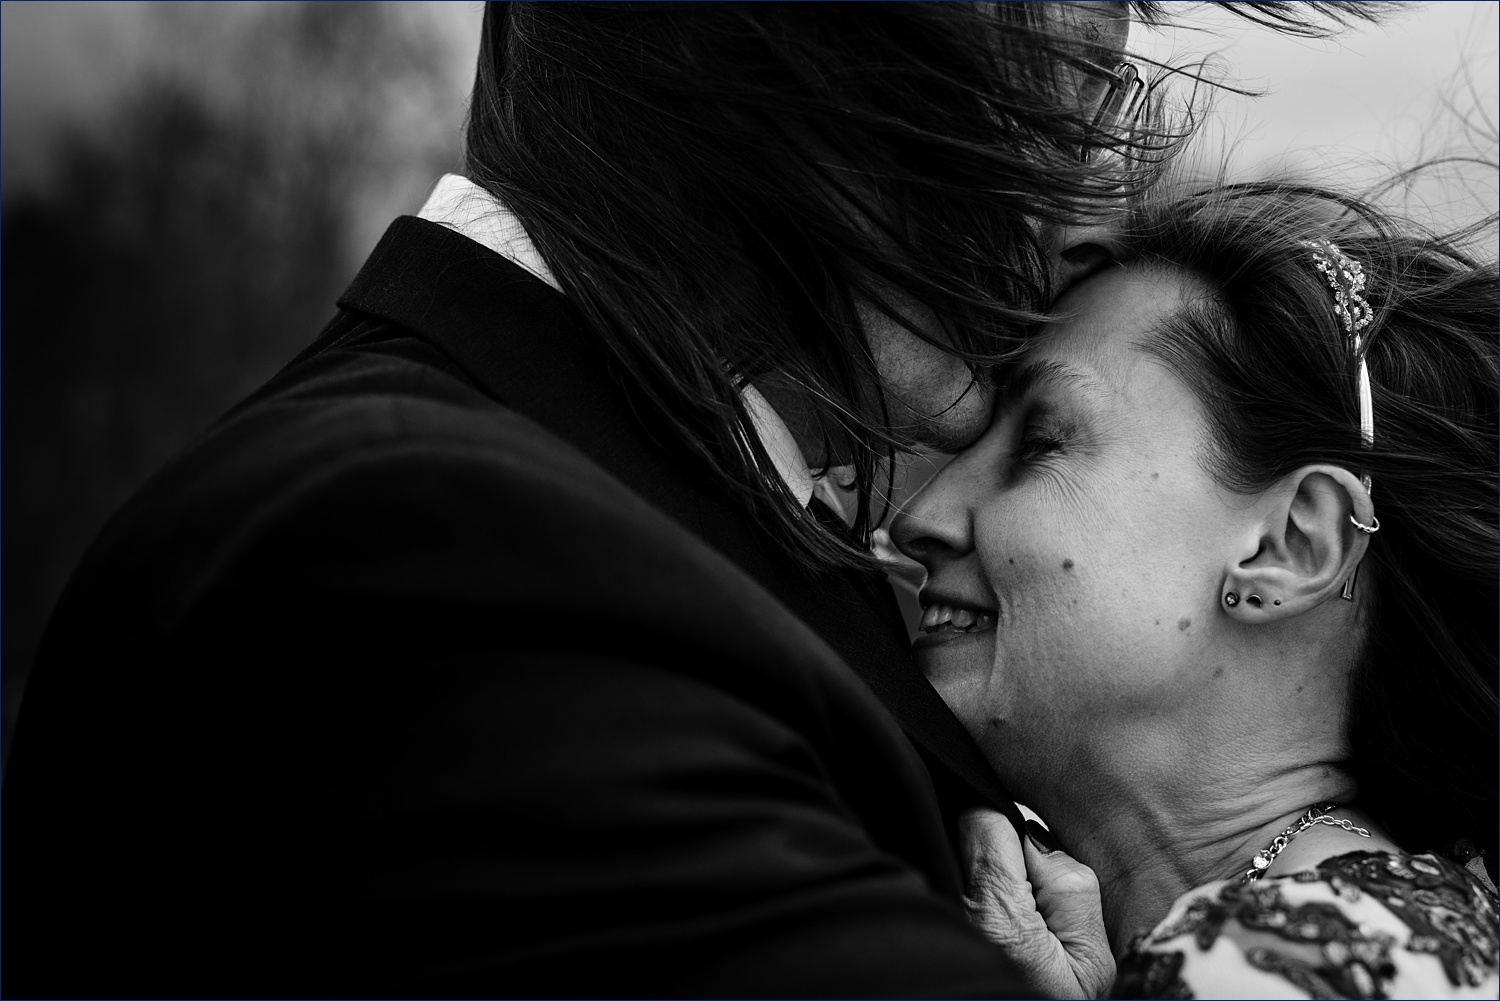 The groom kisses the bride's forehead as she holds tight to him in the wind of the White Mountains after they eloped